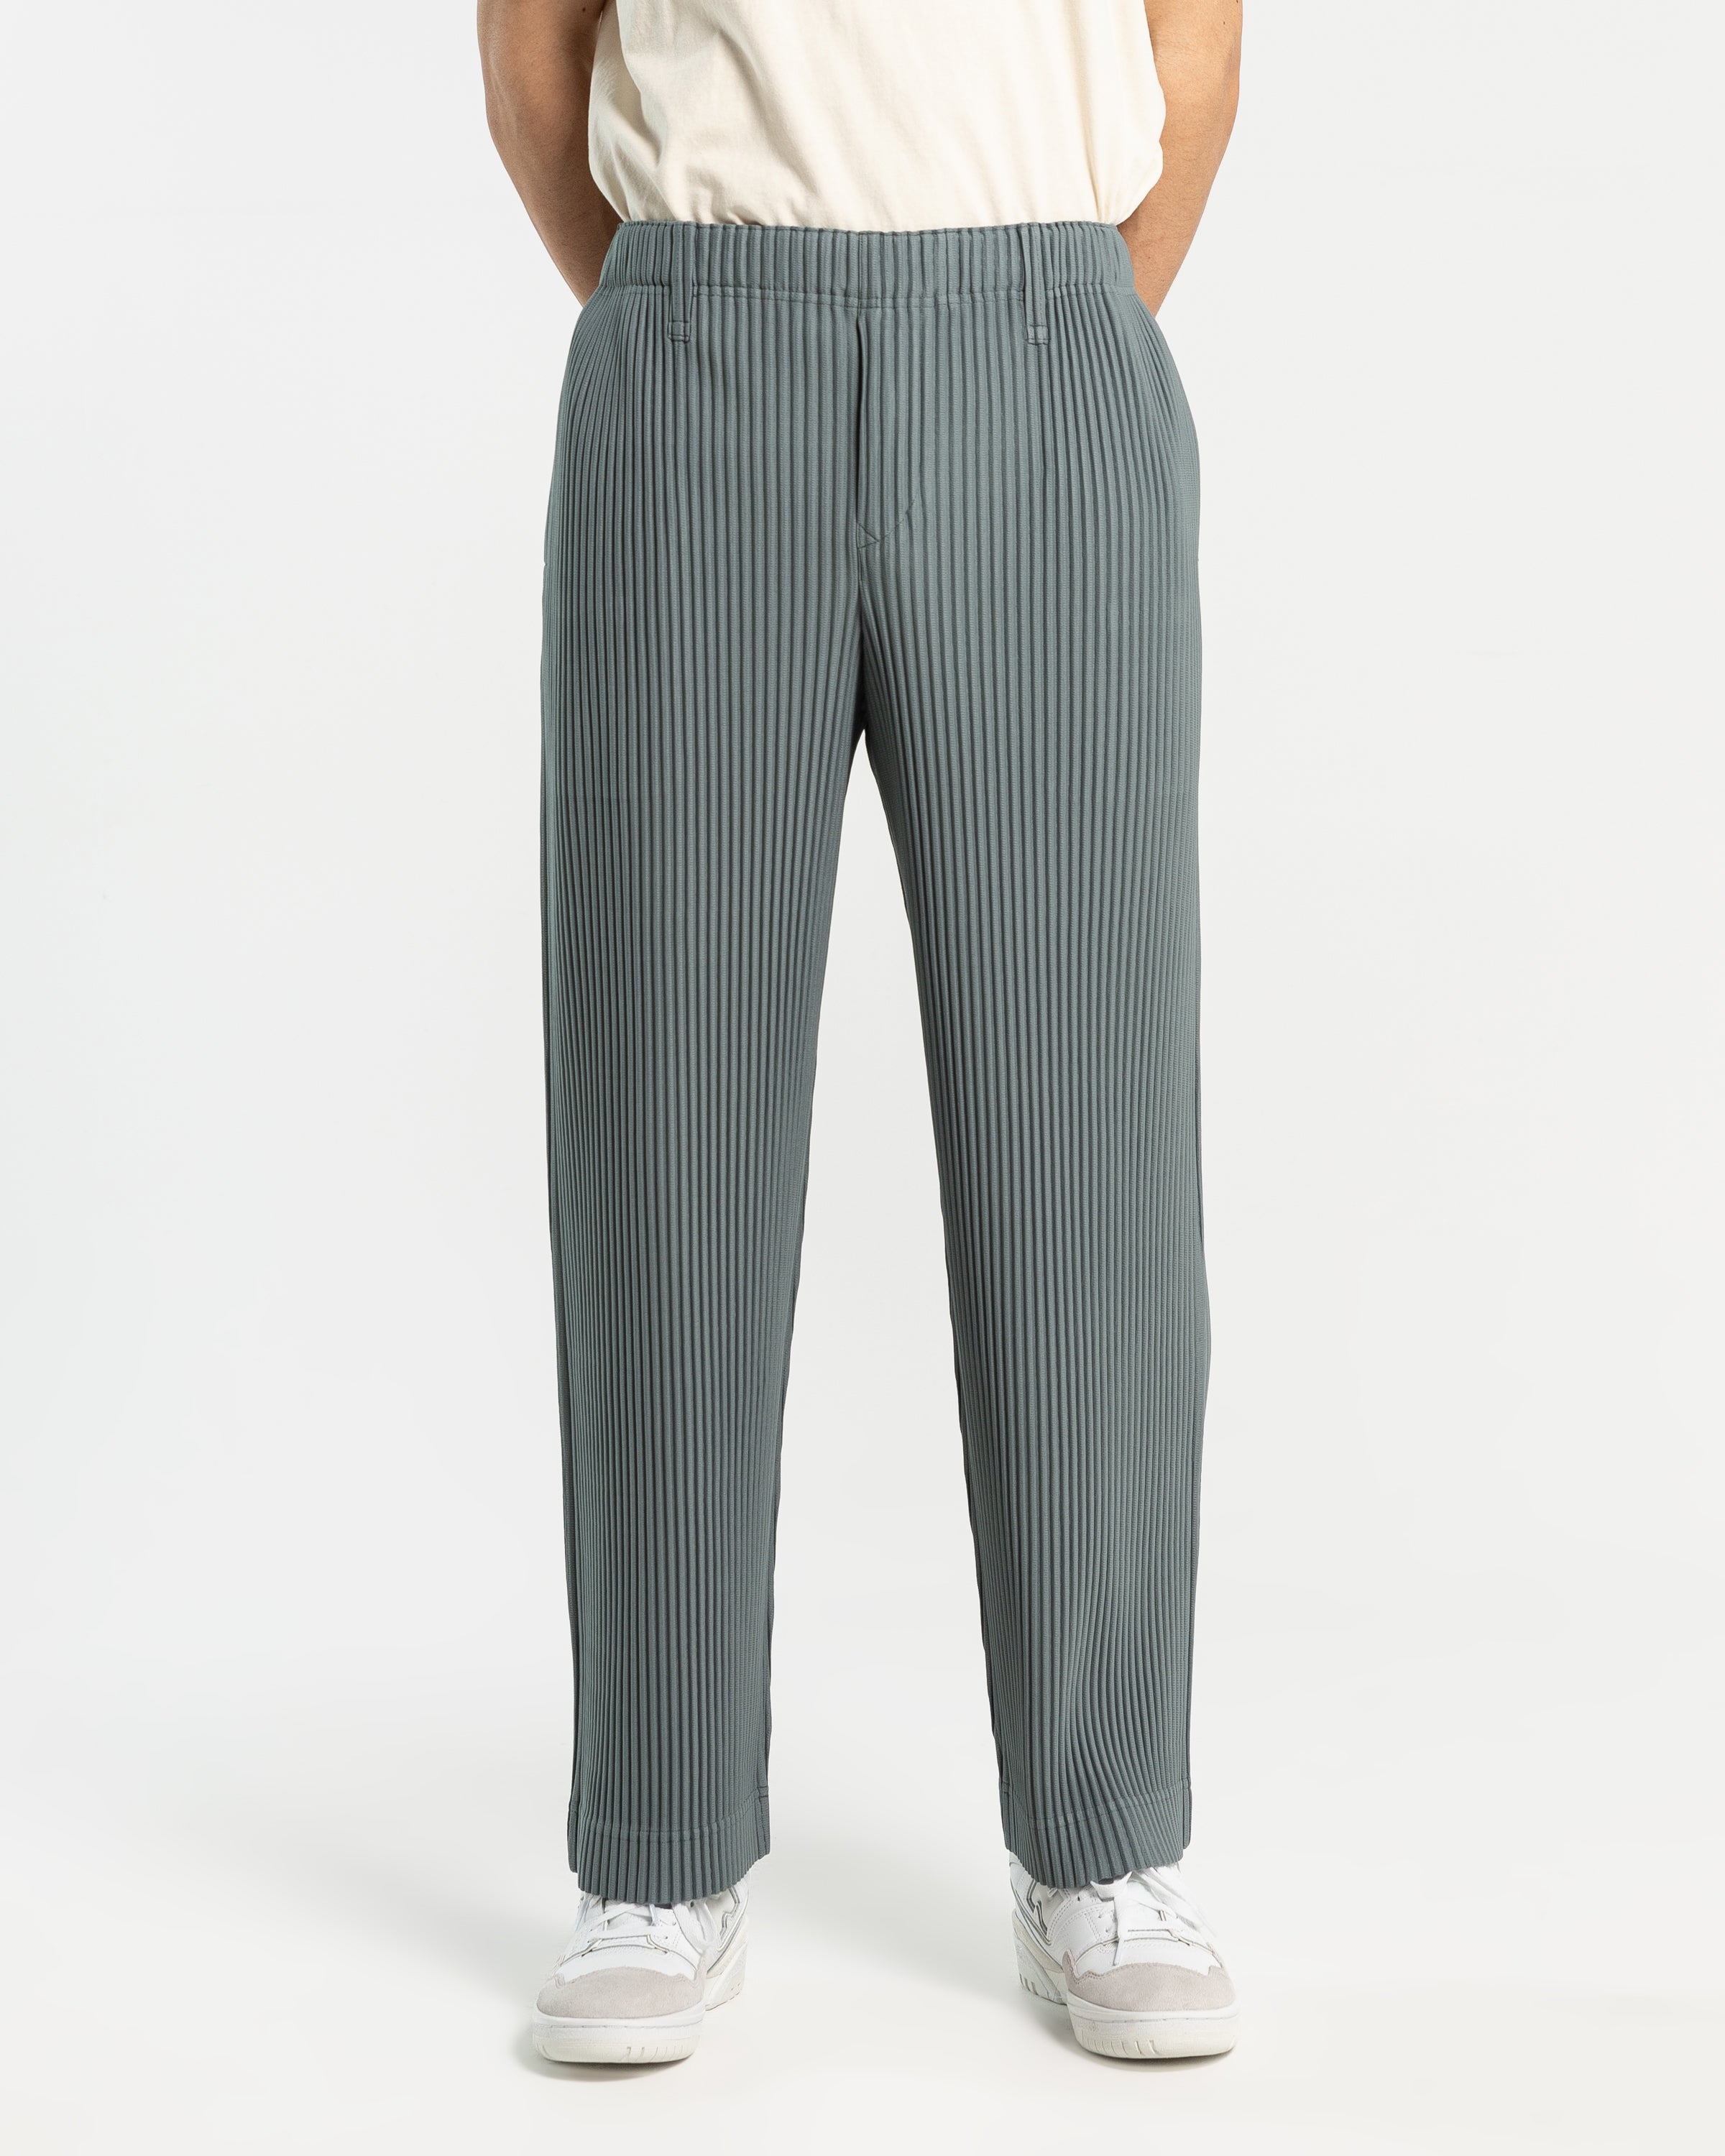 Tailored Pleated Pant in Moss Grey